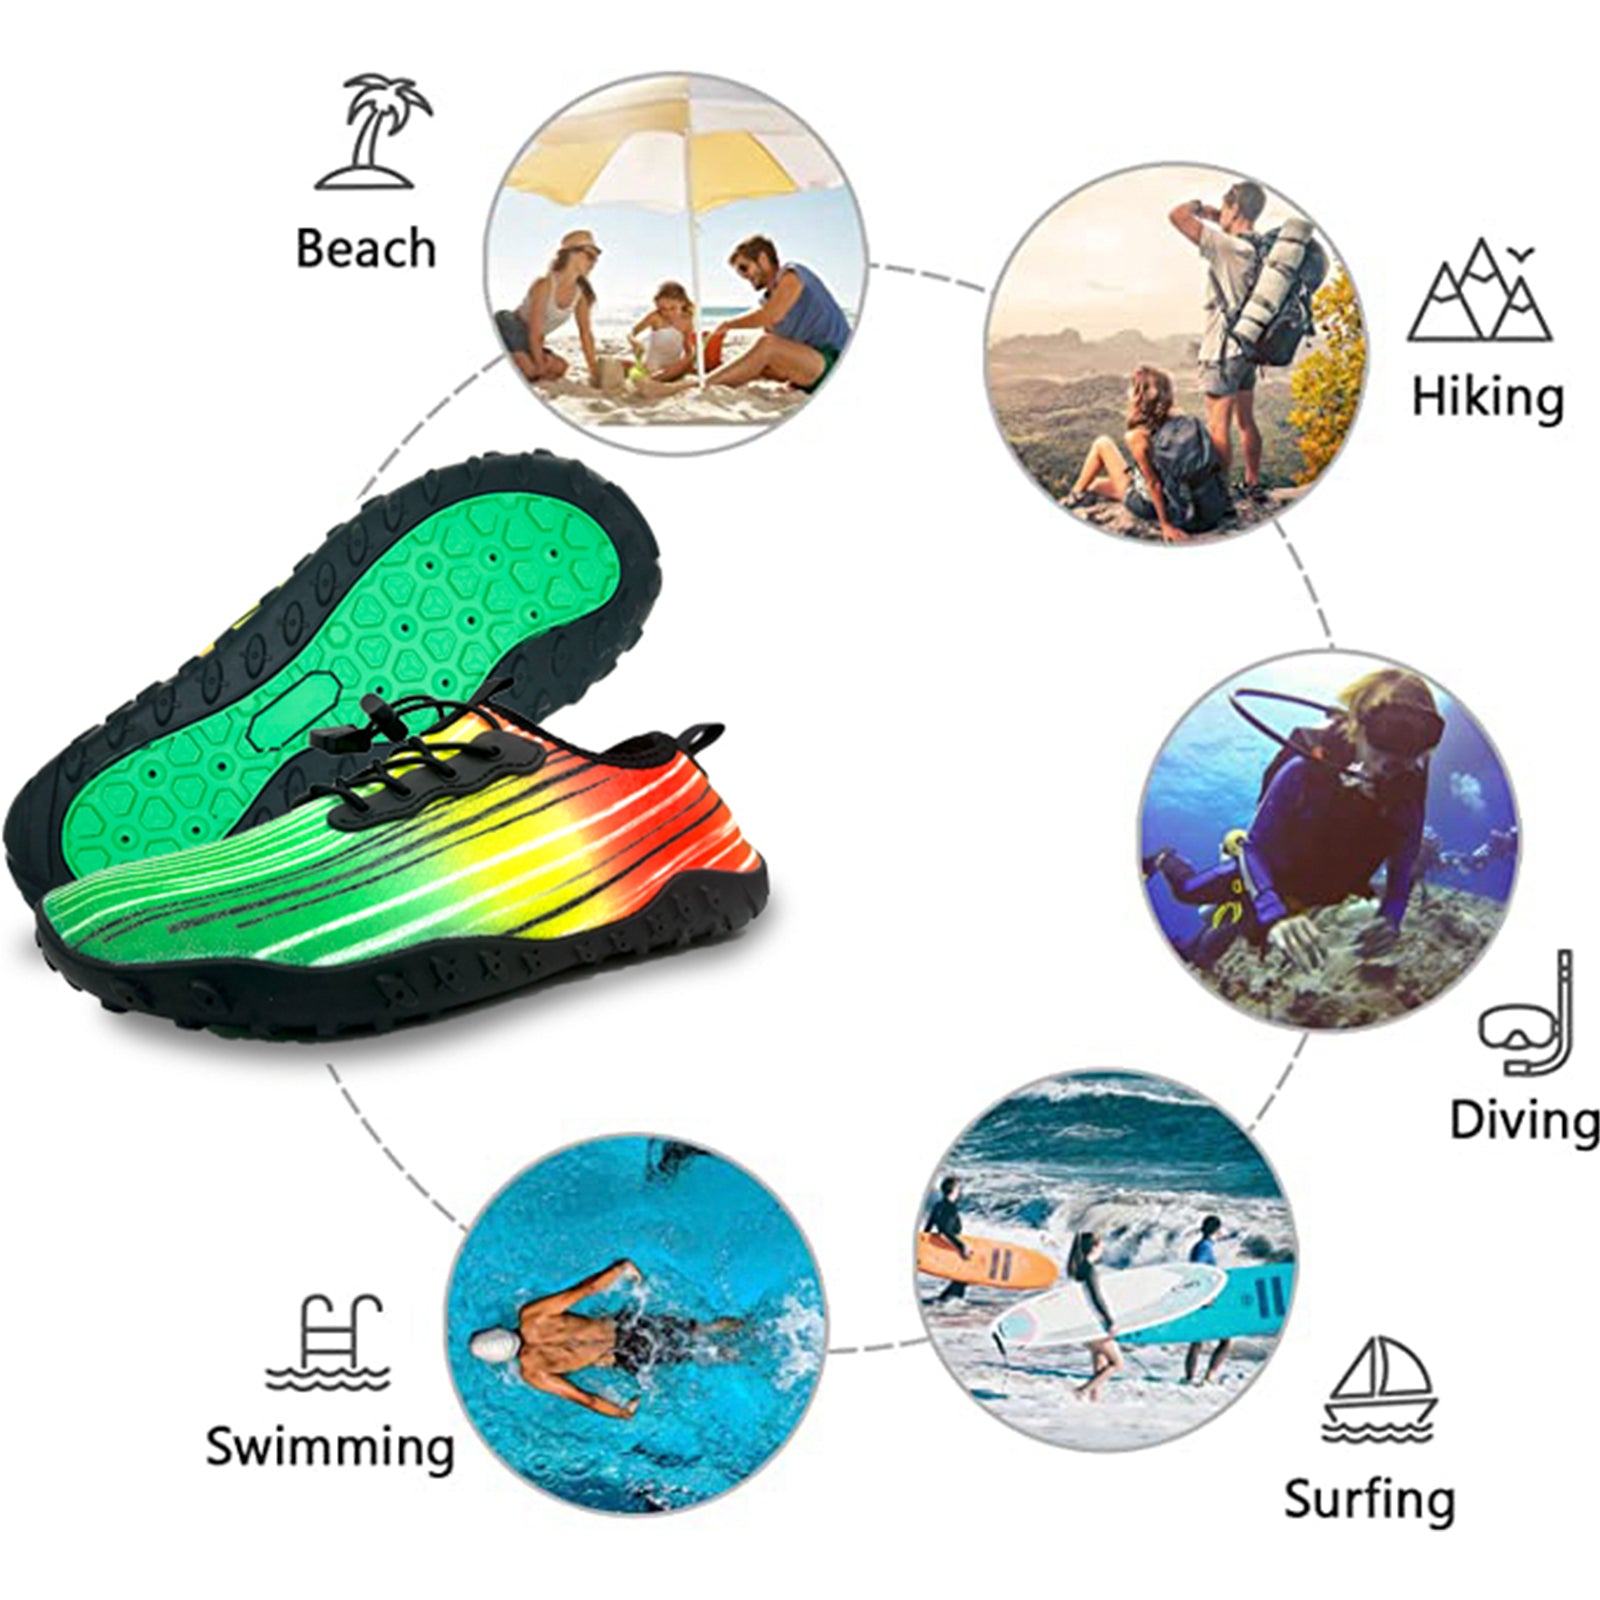 Water Shoes for Men and Women Soft Breathable Slip-on Aqua Shoes Aqua Socks for Swim Beach Pool Surf Yoga (Green Size US 9.5) from Deals499 at Deals499